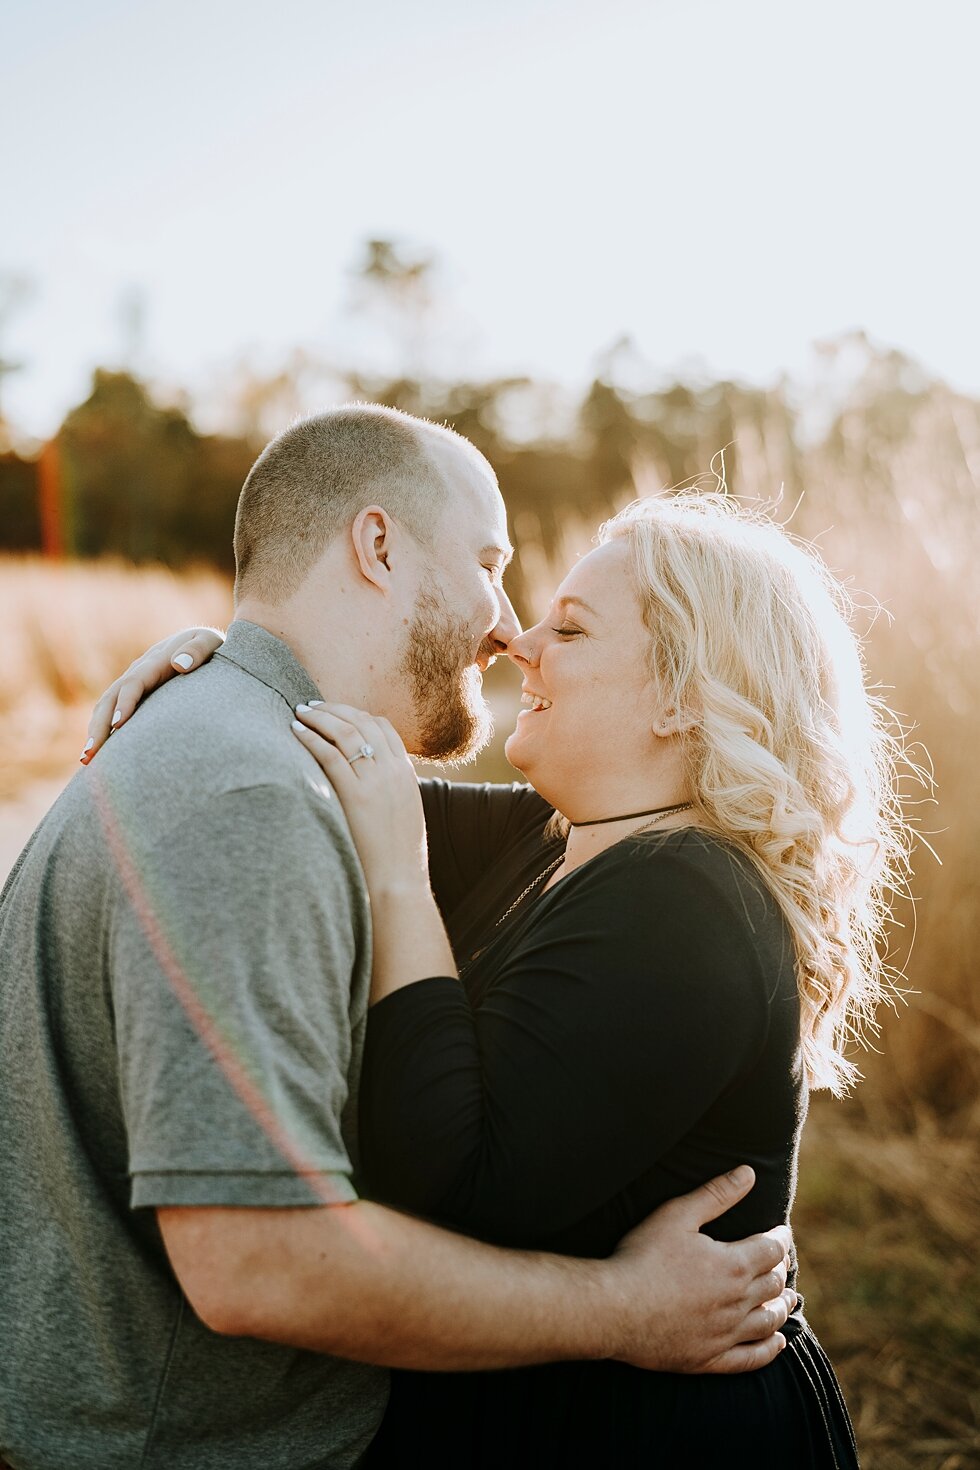  Natural smiles just before this engaged couple shares a kiss #engagementgoals #engagementphotographer #engaged #outdoorengagement #kentuckyphotographer #indianaphotographer #louisvillephotographer #engagementphotos #savethedatephotos #savethedates #